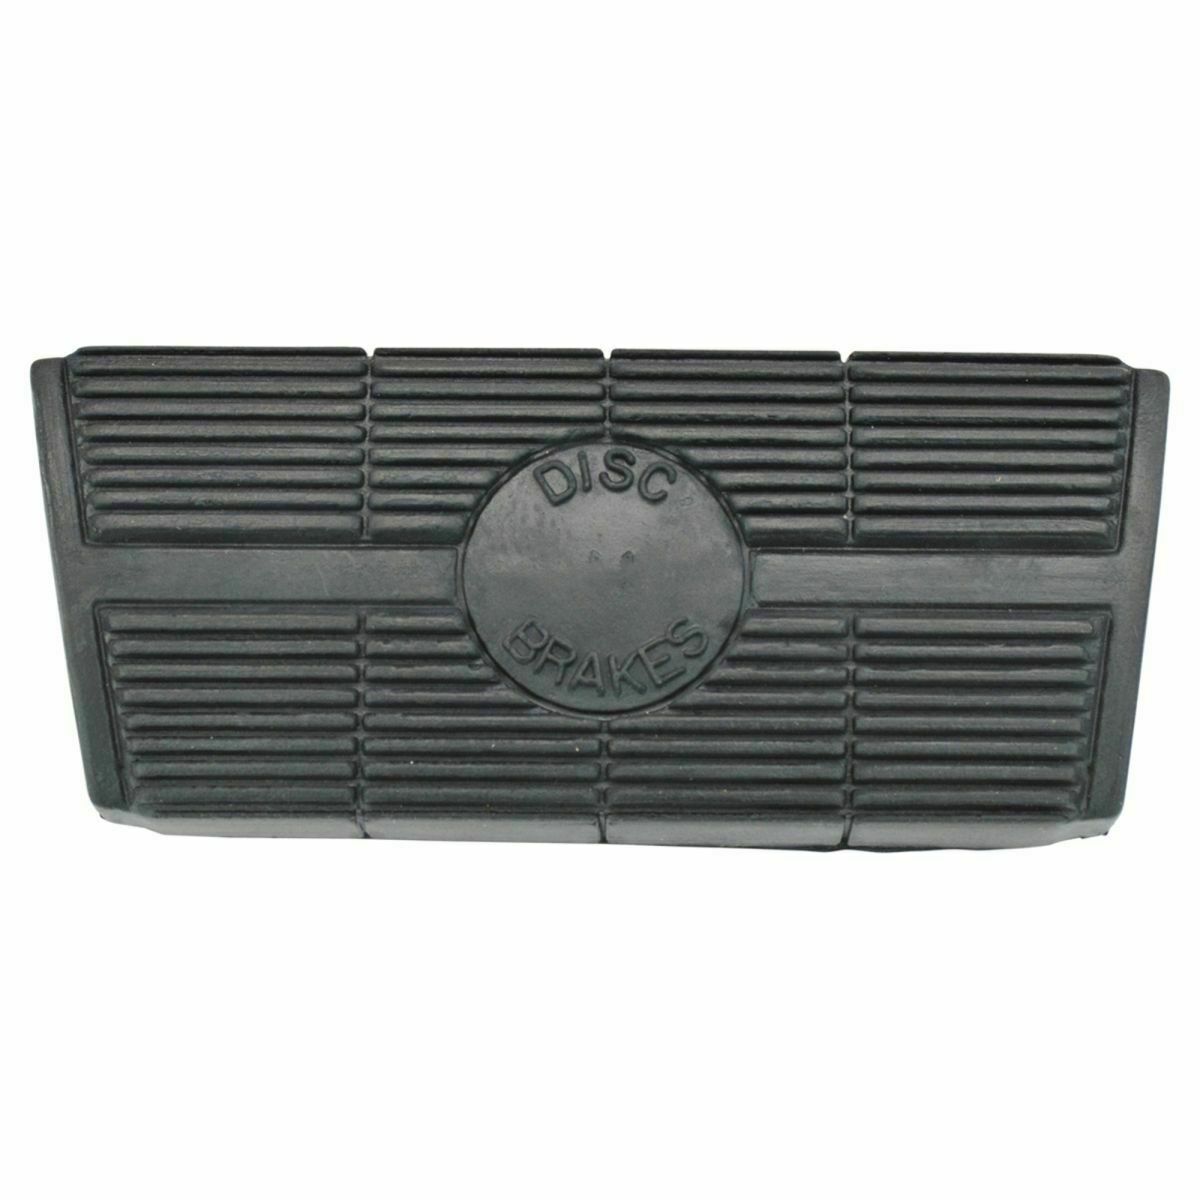 NEW Brake Pedal Pad Automatic for Buick Chevrolet GMC Cadillac Pontiac Olds